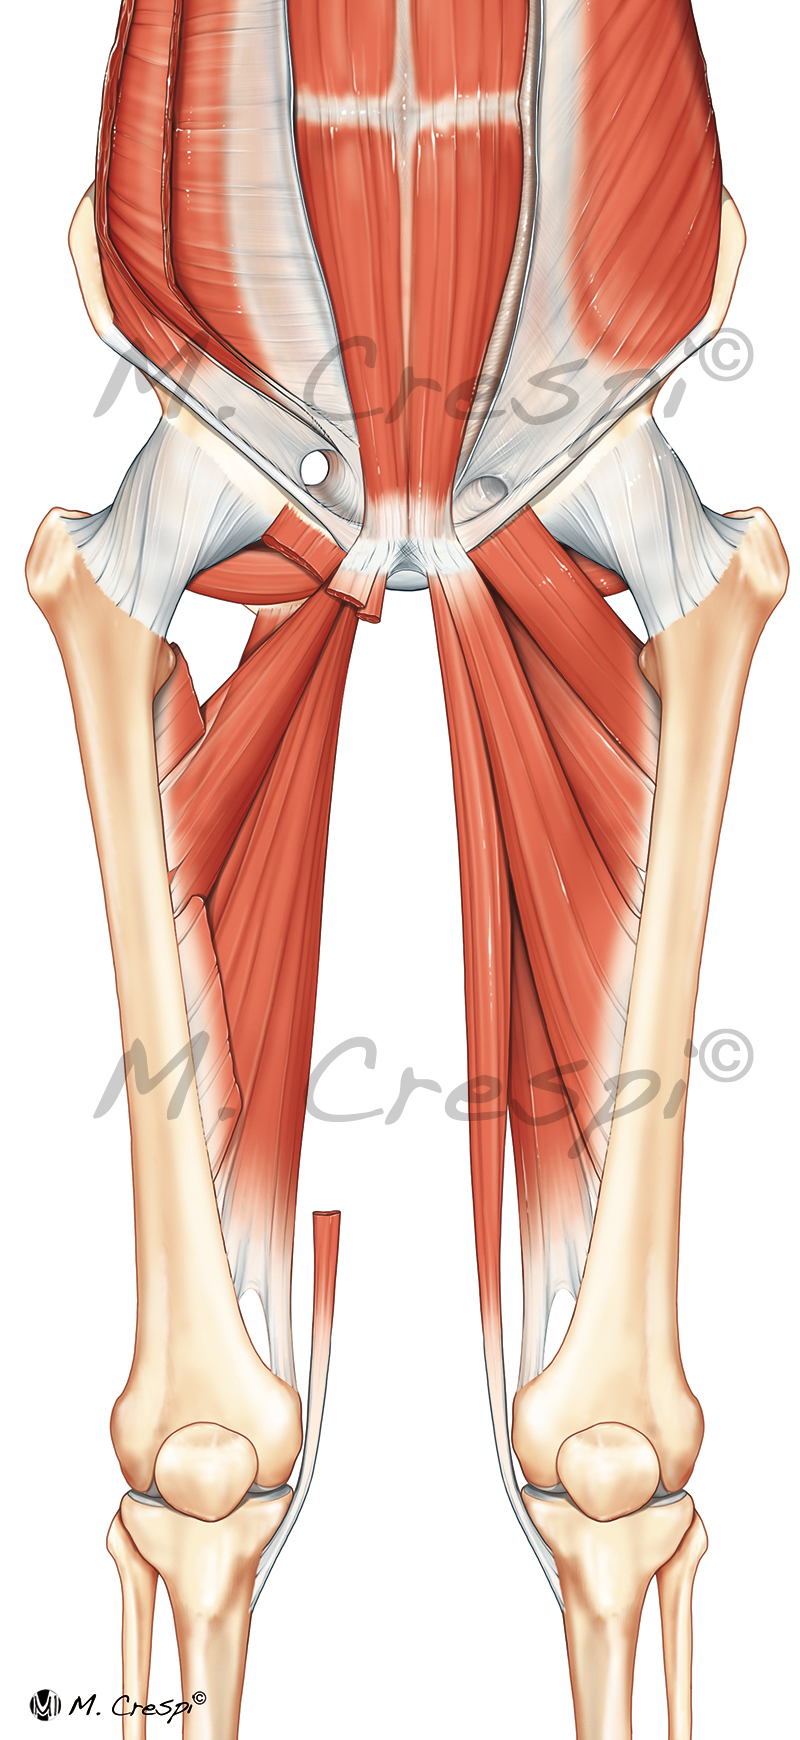 Anatomy of the muscular insertions in the pubic symphysis